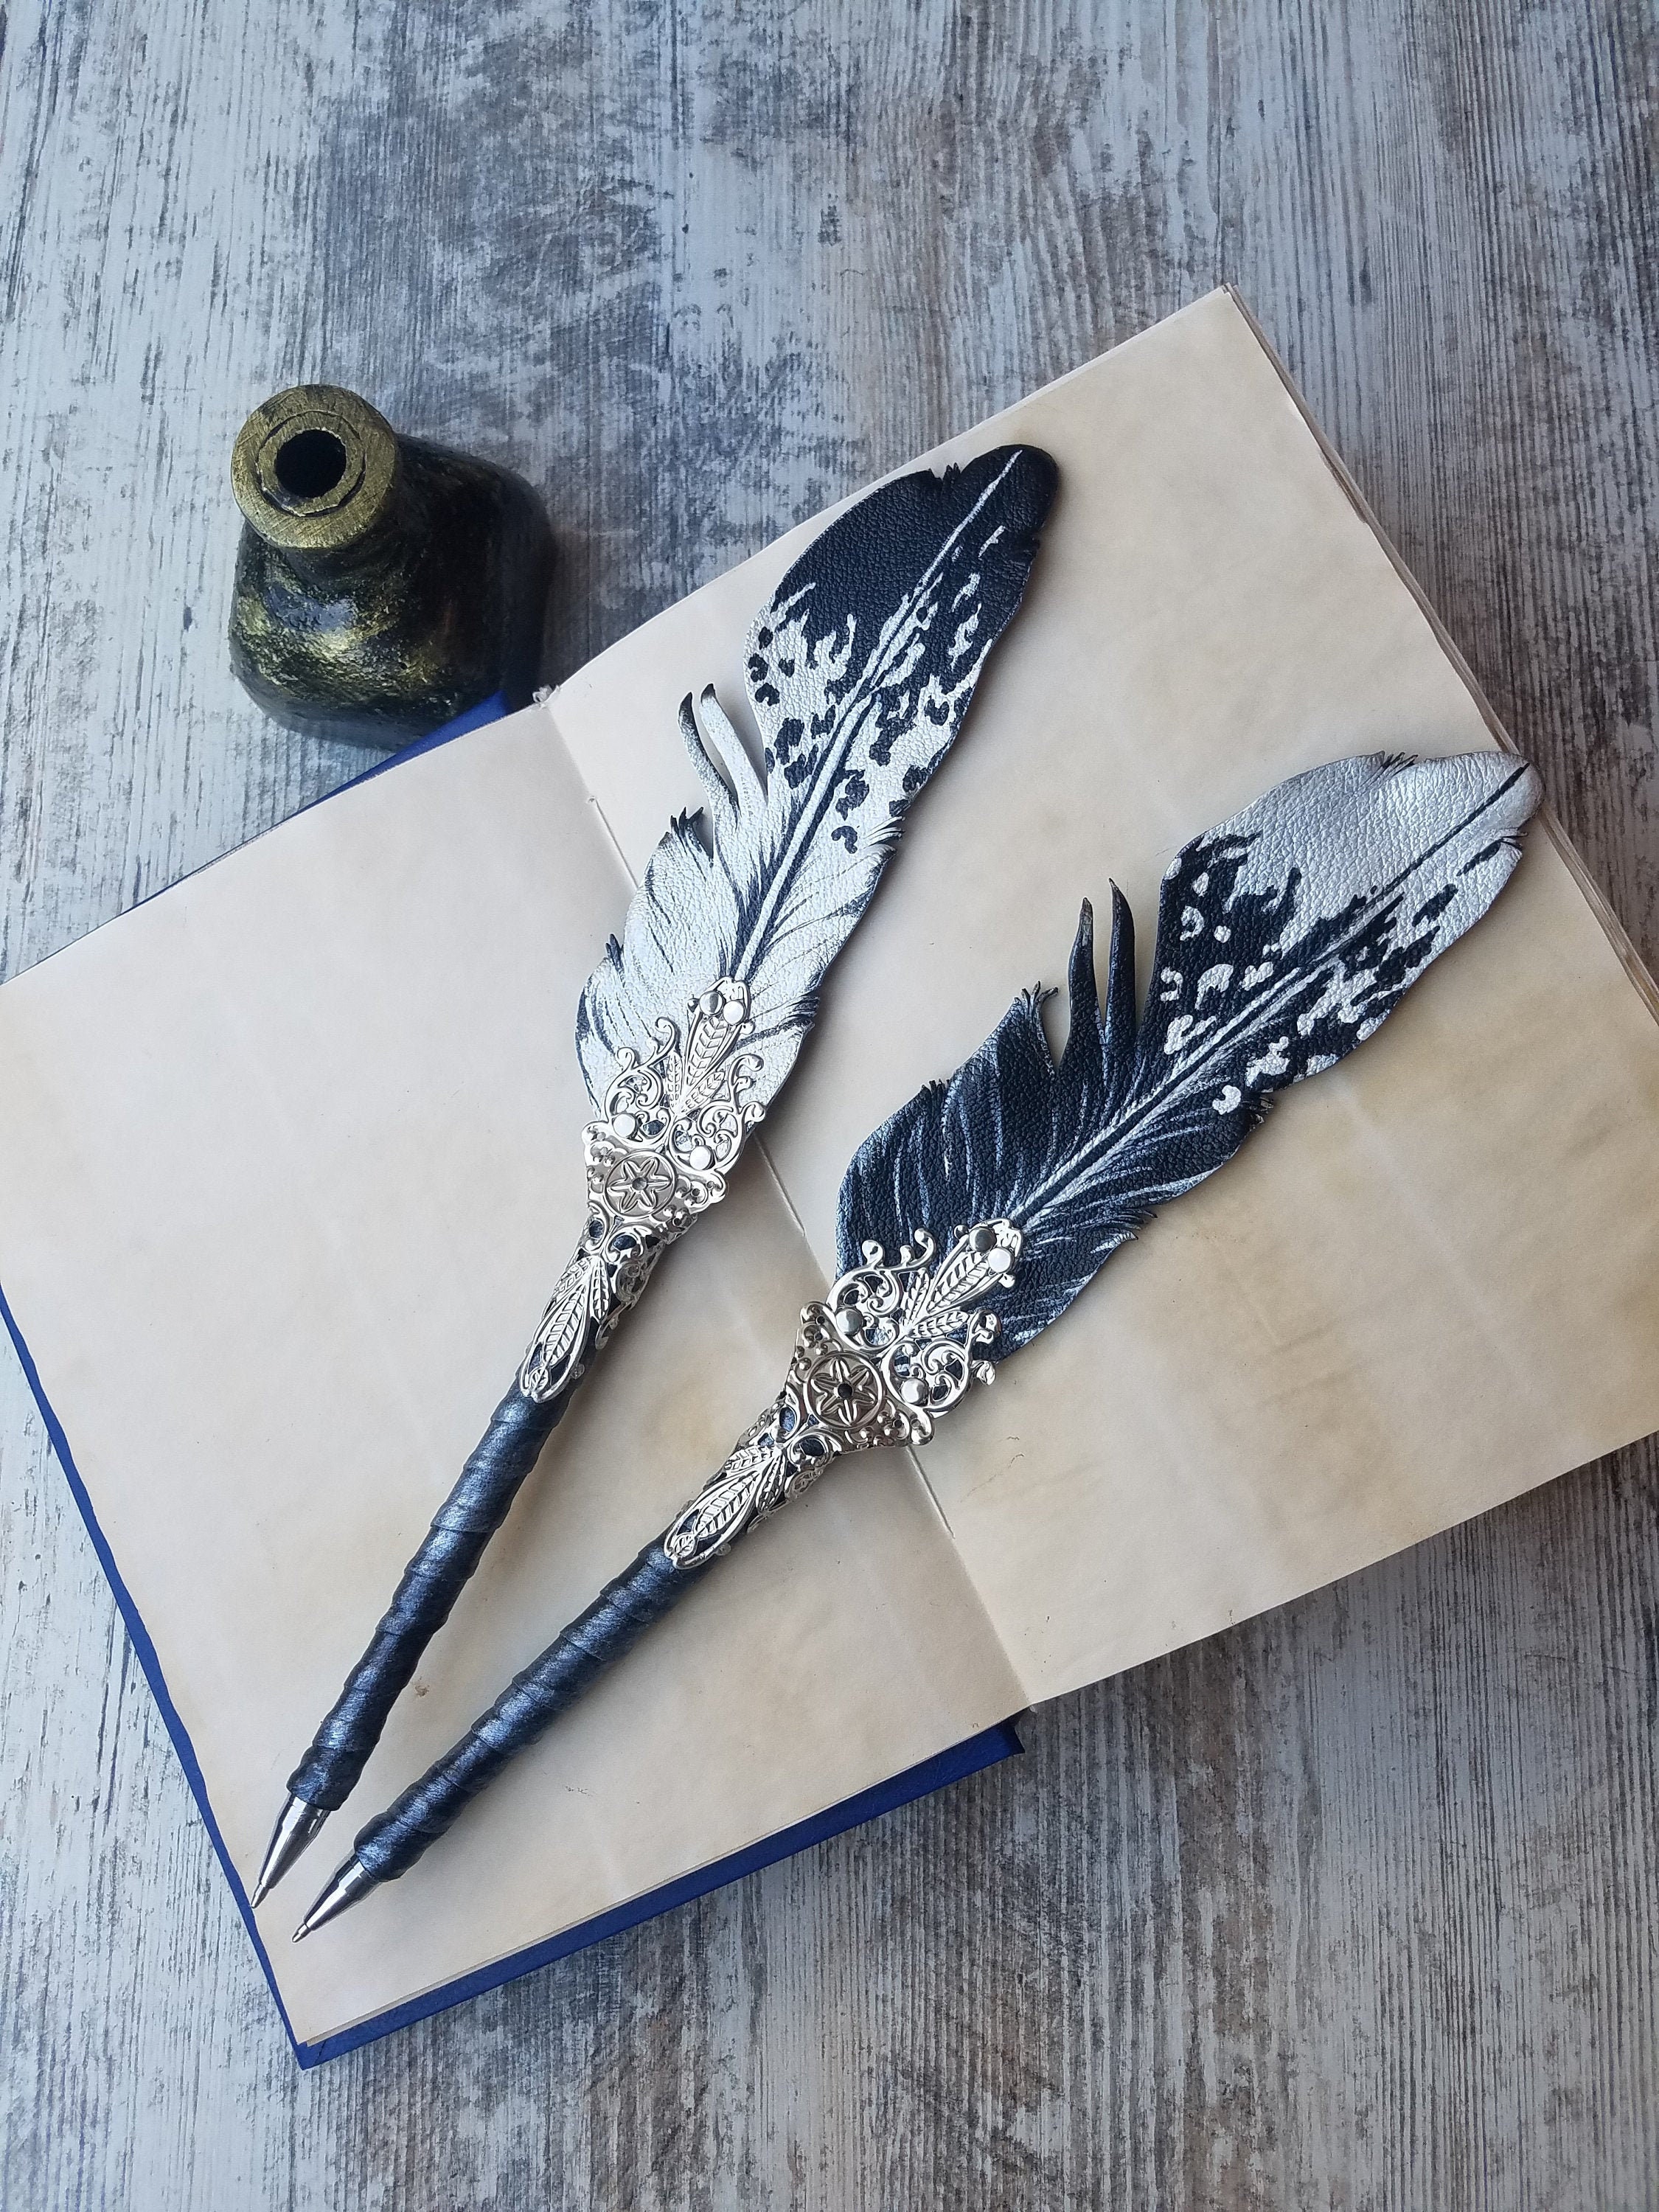 Retro Quill Natural Turkey Feather Dip Pen Caligraphy Fountain